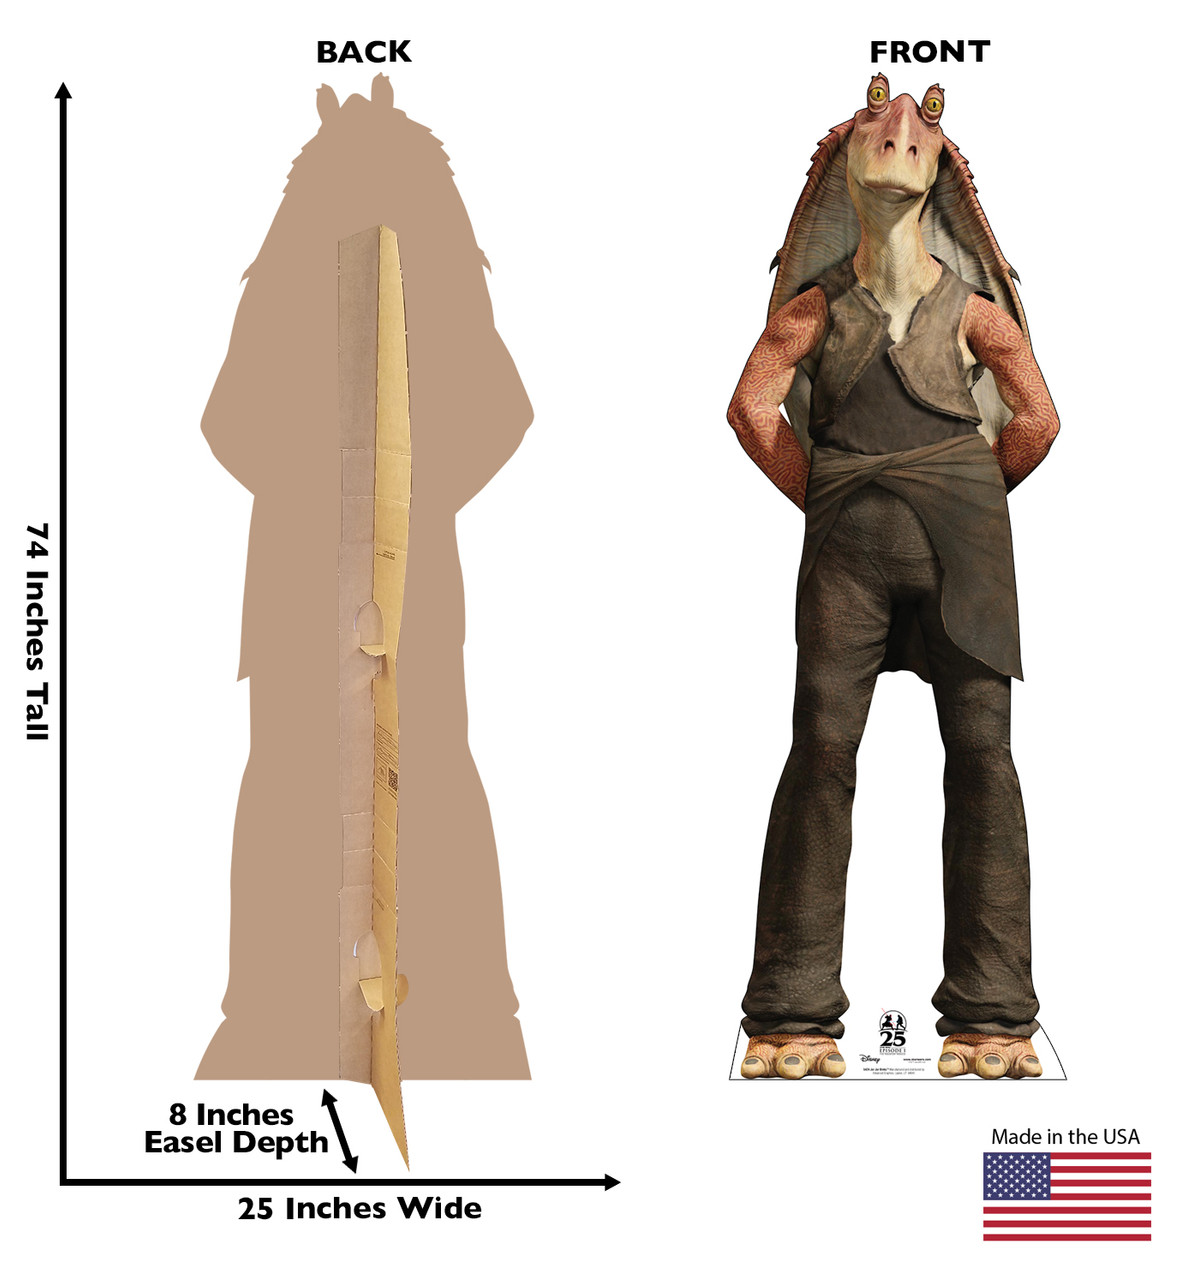 Life-size cardboard standee of Jar Jar Binks™ with back and front dimensions.